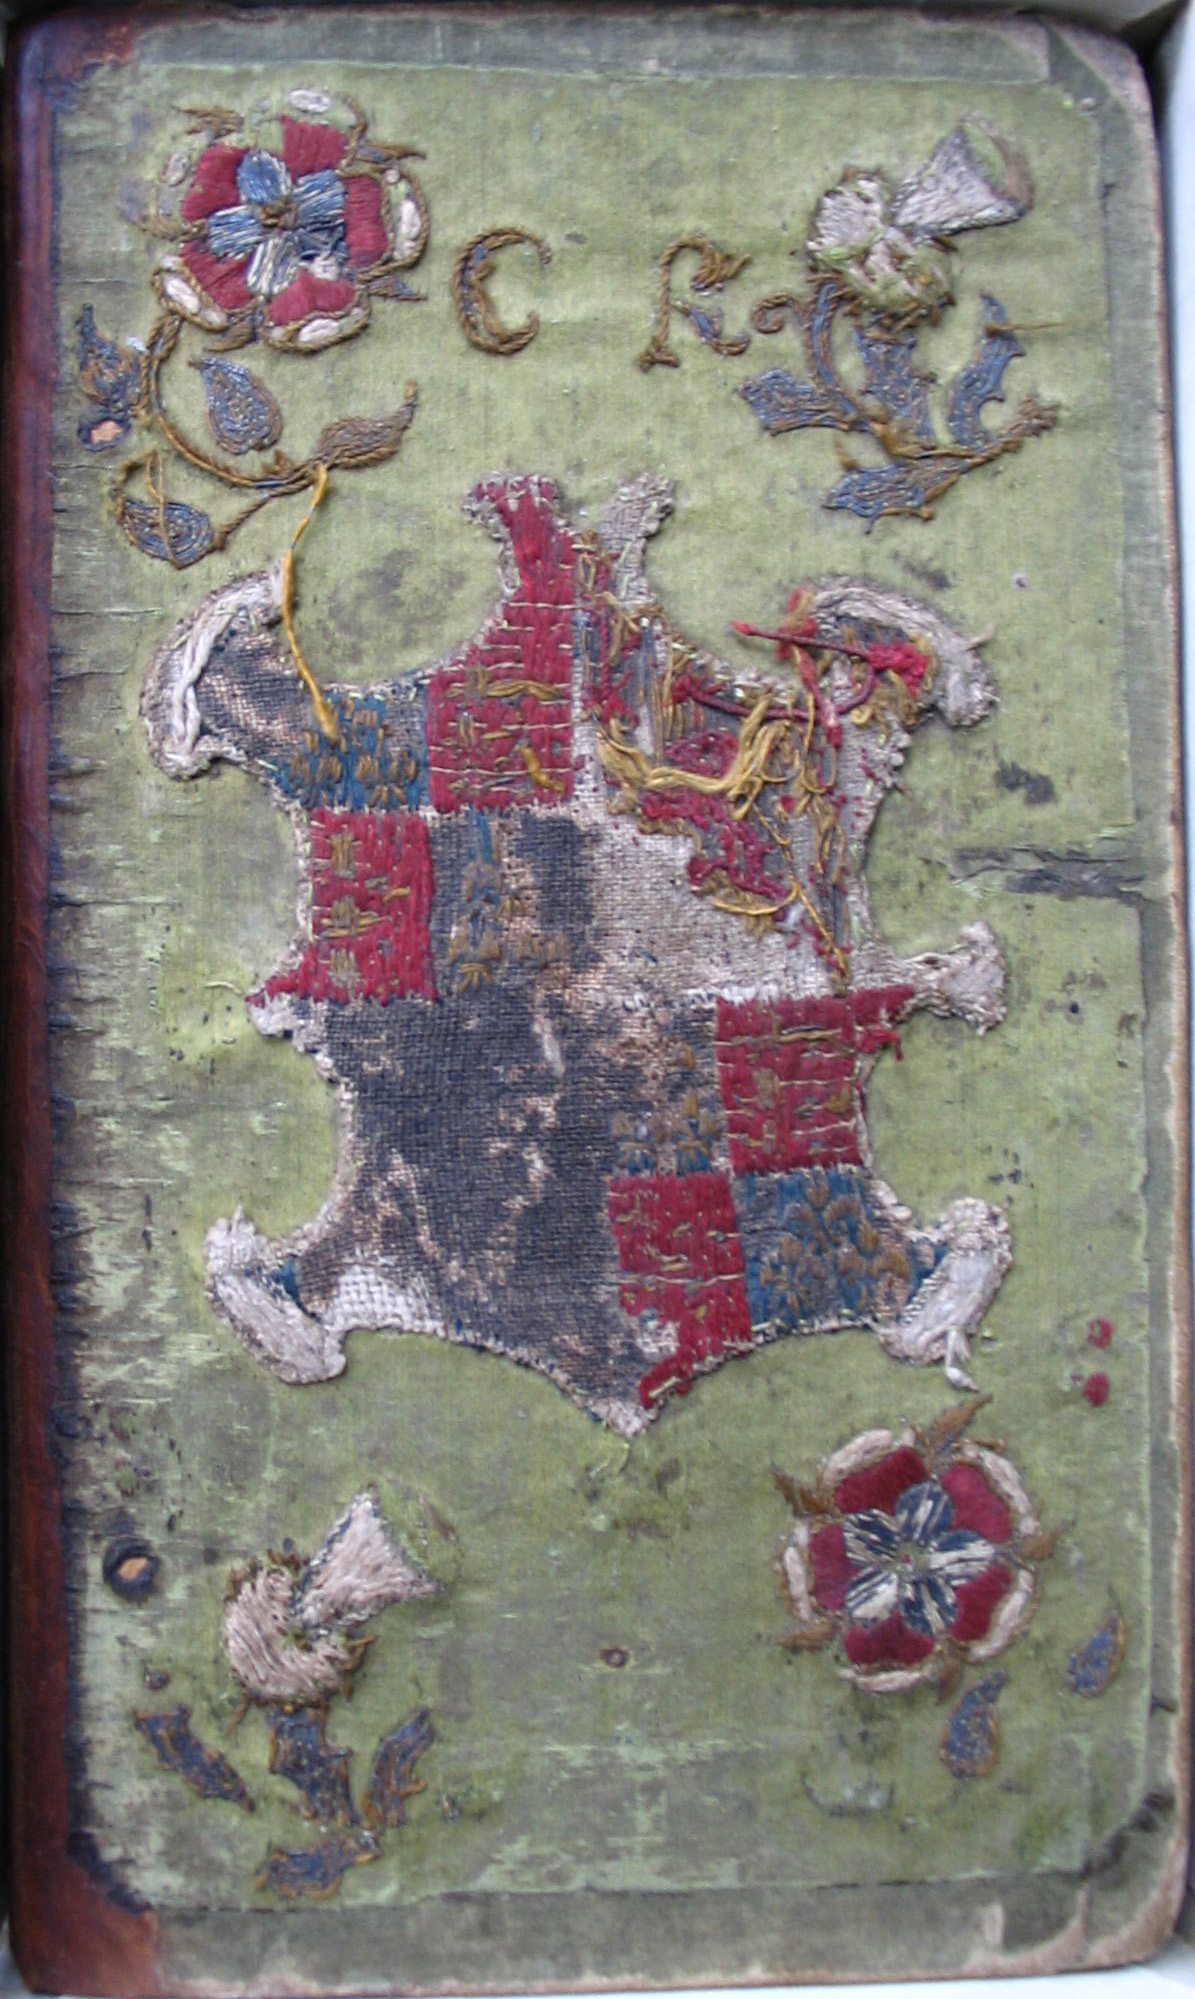 A book bound in green fabric embroidered with flowers, a coat of arms, and the initials C R.